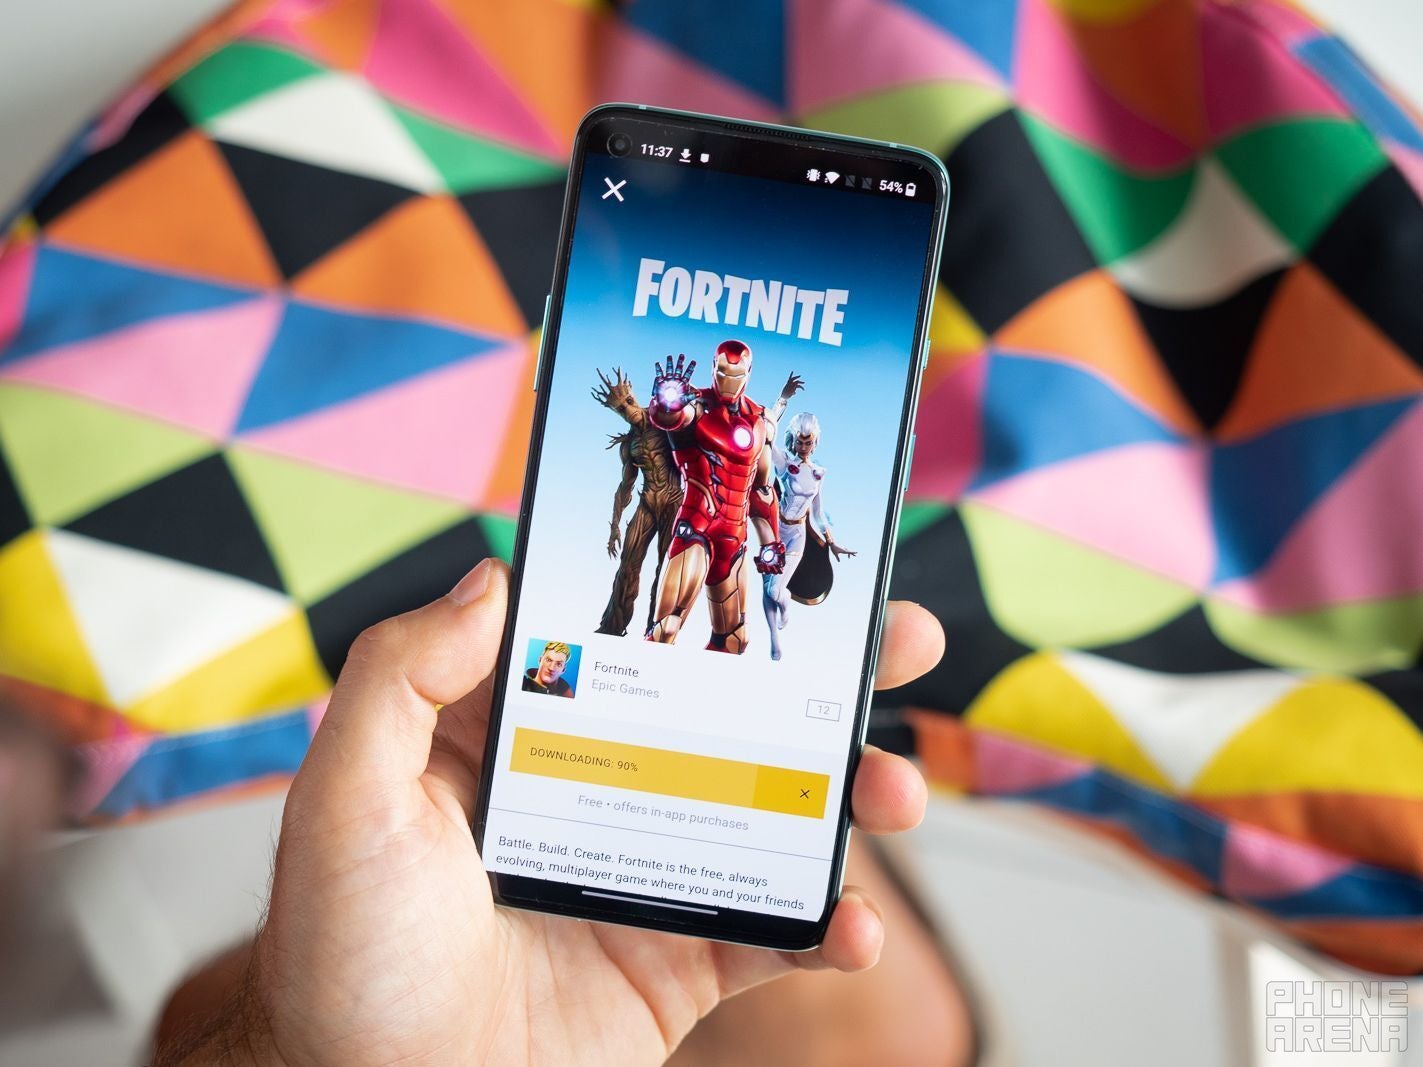 Despite the legal battles, Fortnite is still available on Android, but from outside the Play Store. - If you are still playing Fortnite on iPhone, you might want to spend your V-bucks while you can